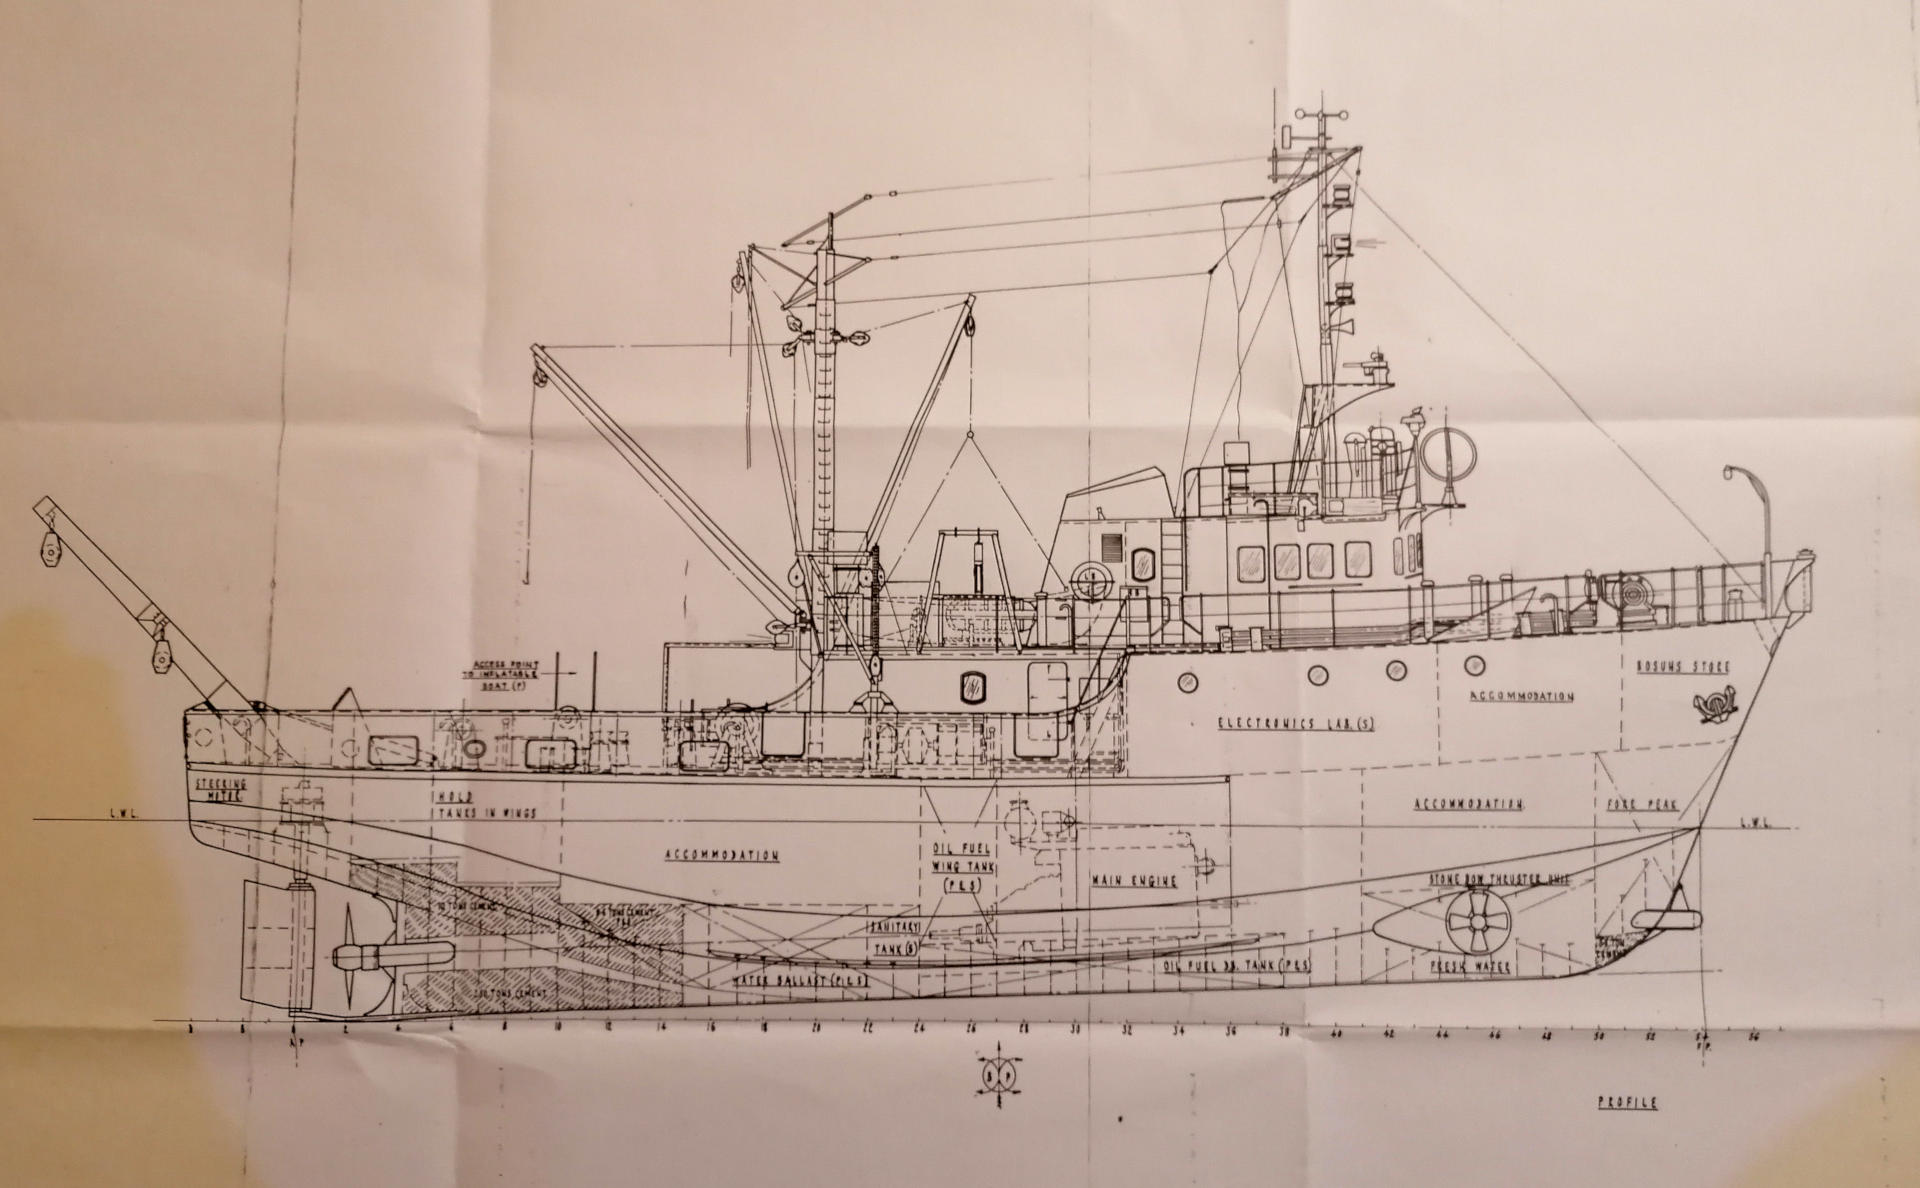 Fisheries Research / Diving / Hydrographic Survey Vessel.   LOA 29.65m